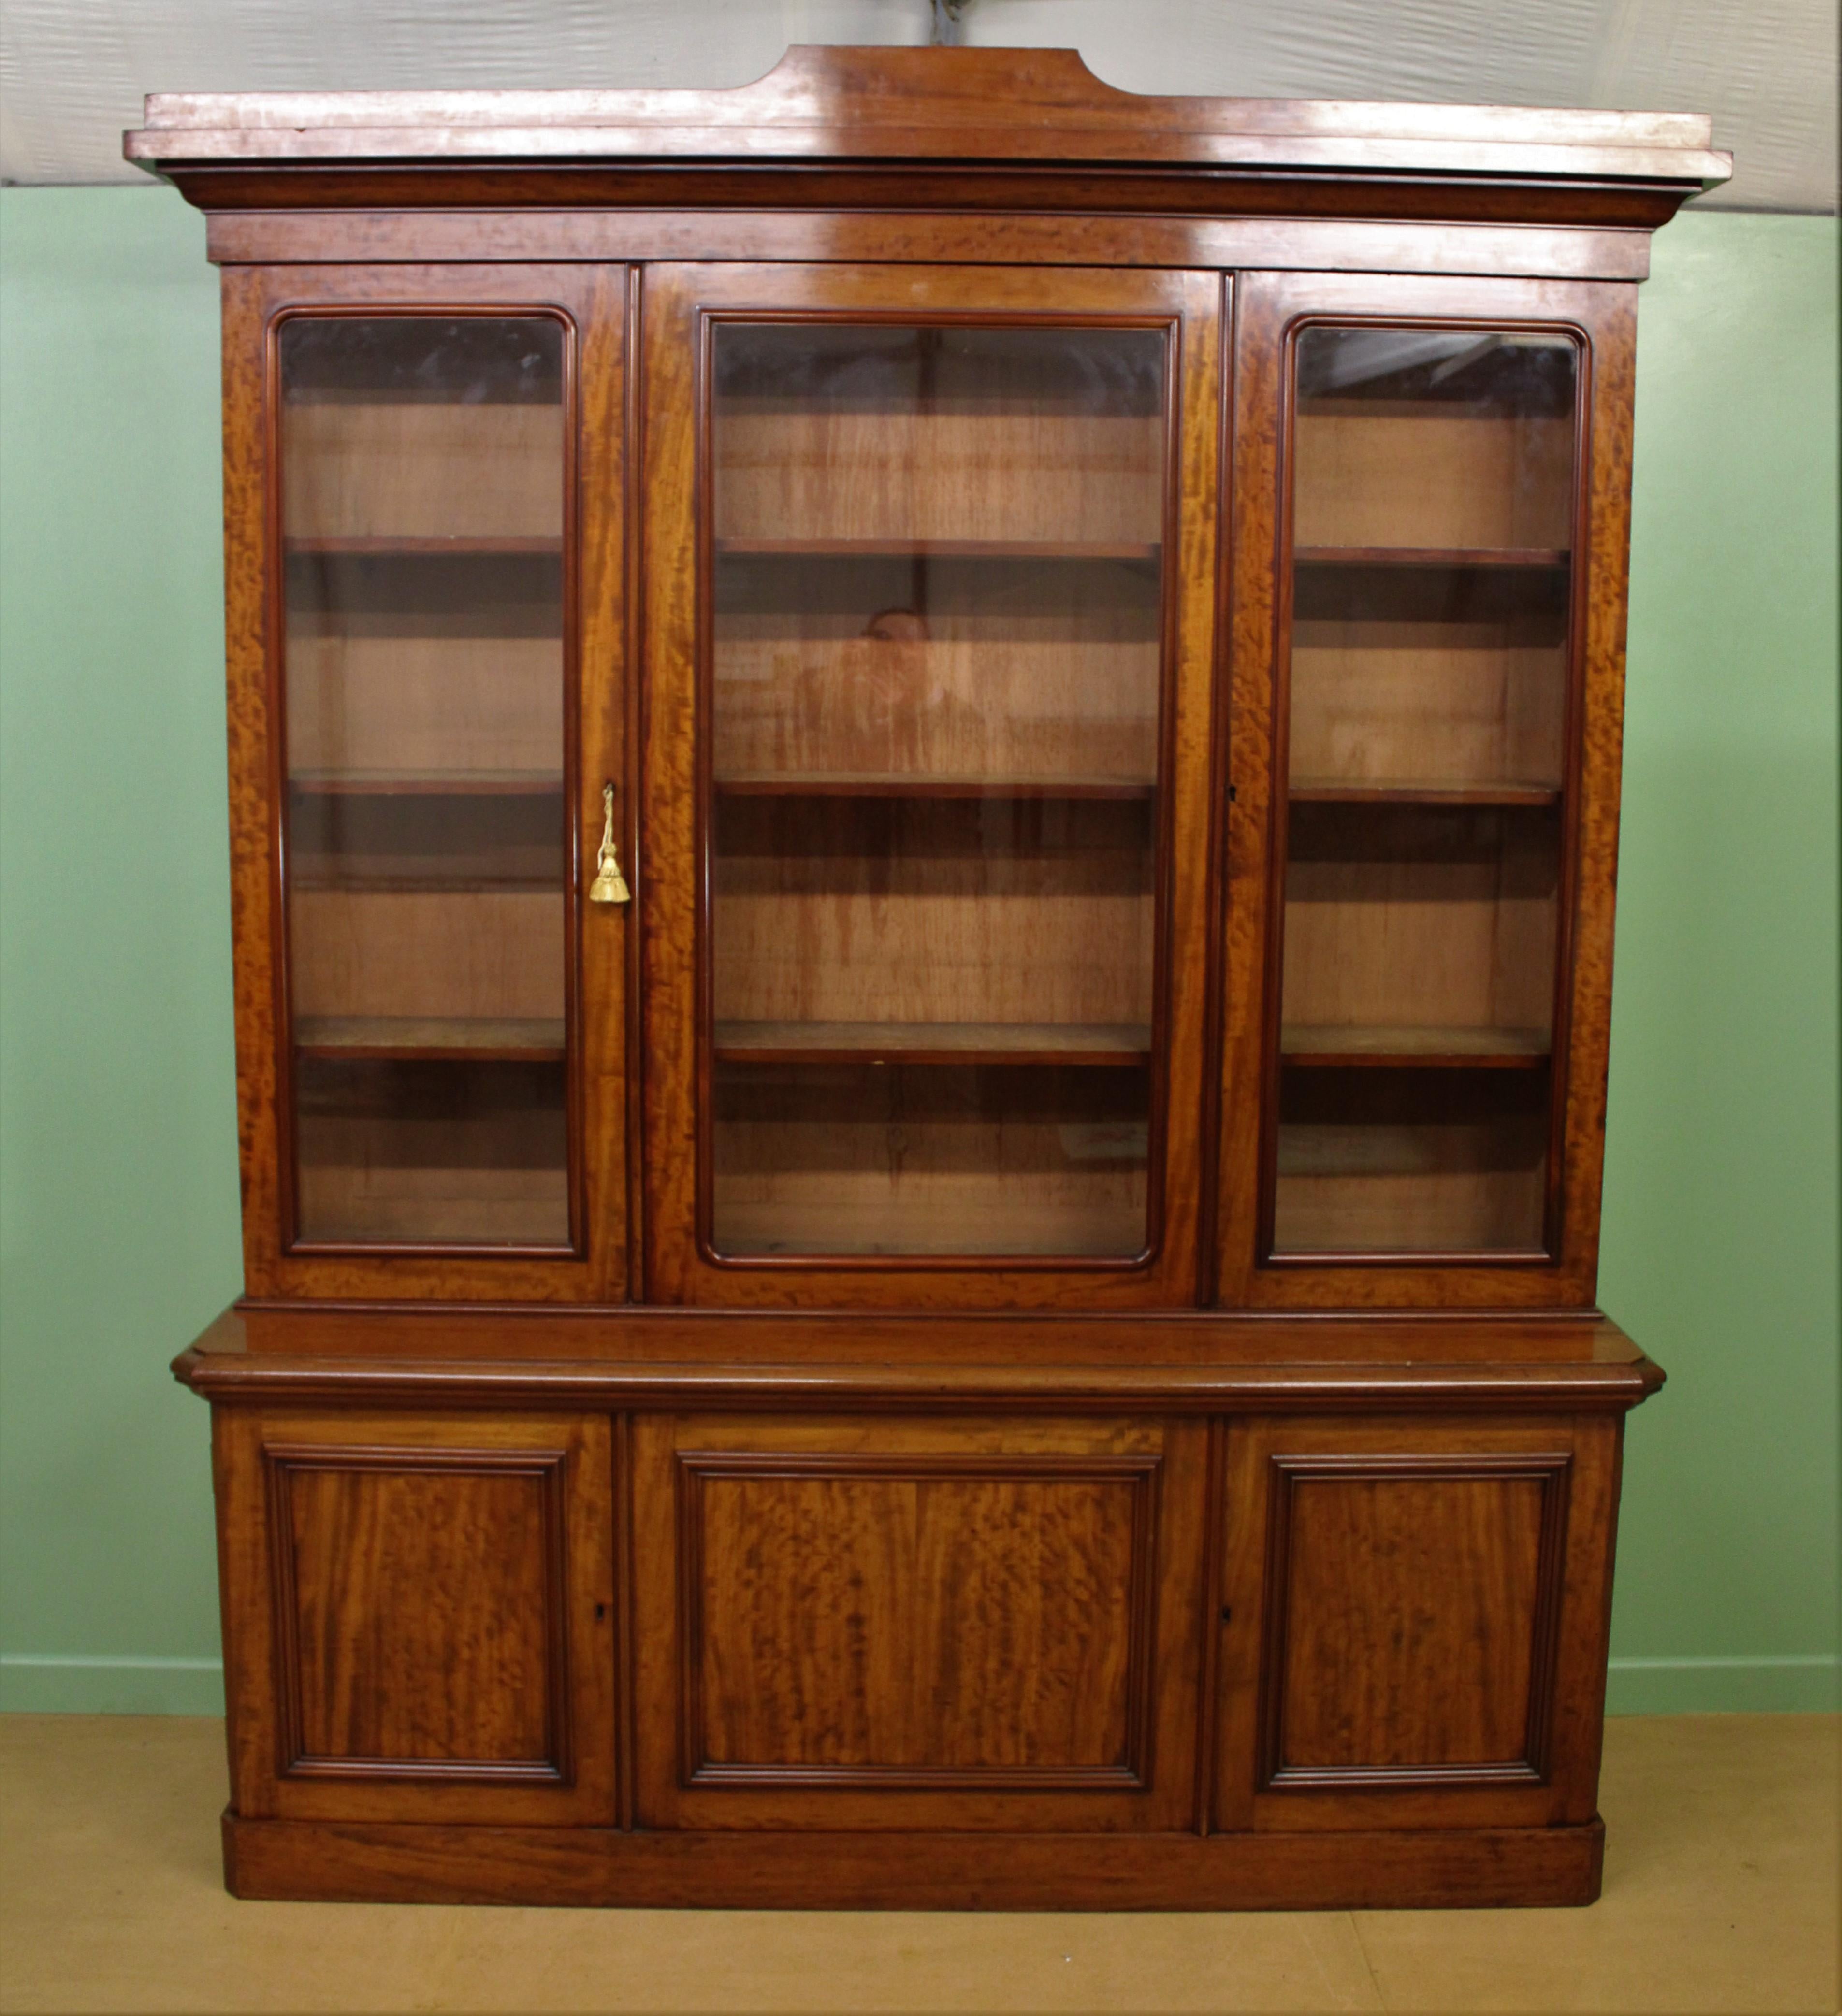 A very fine quality early Victorian period figured mahogany library bookcase. Of excellent construction in solid mahogany with attractive figured mahogany veneers. Of generous proportions, offering superb storage/display capacity. The top section